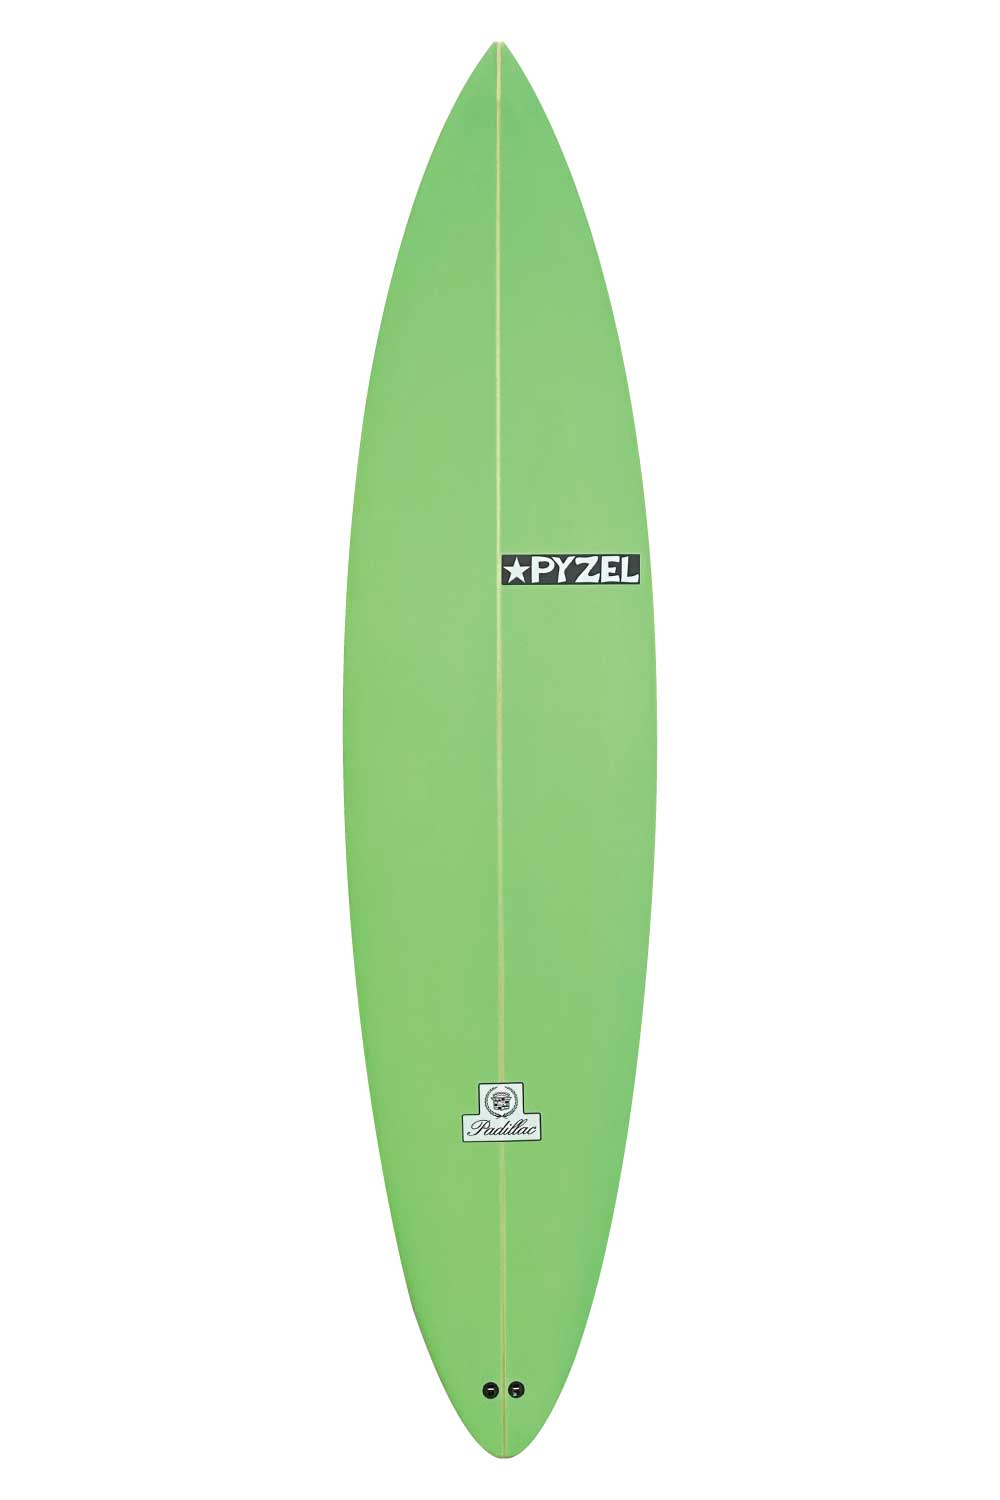 Pyzel Padillac Step Up Surfboard - With Spray